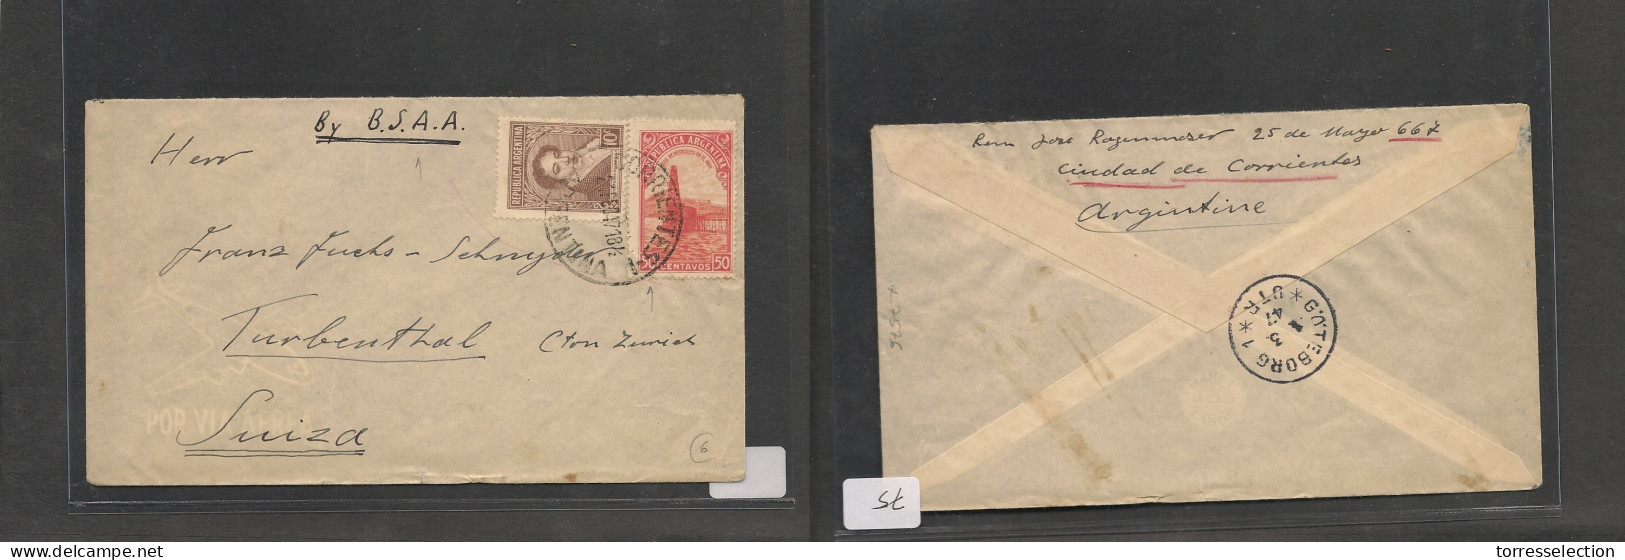 ARGENTINA. Argentina Cover - 1947 Corrientes 1 To Switz Turbenthal Via BSAA Mult Fkd Env, Fine XSALE. - Other & Unclassified